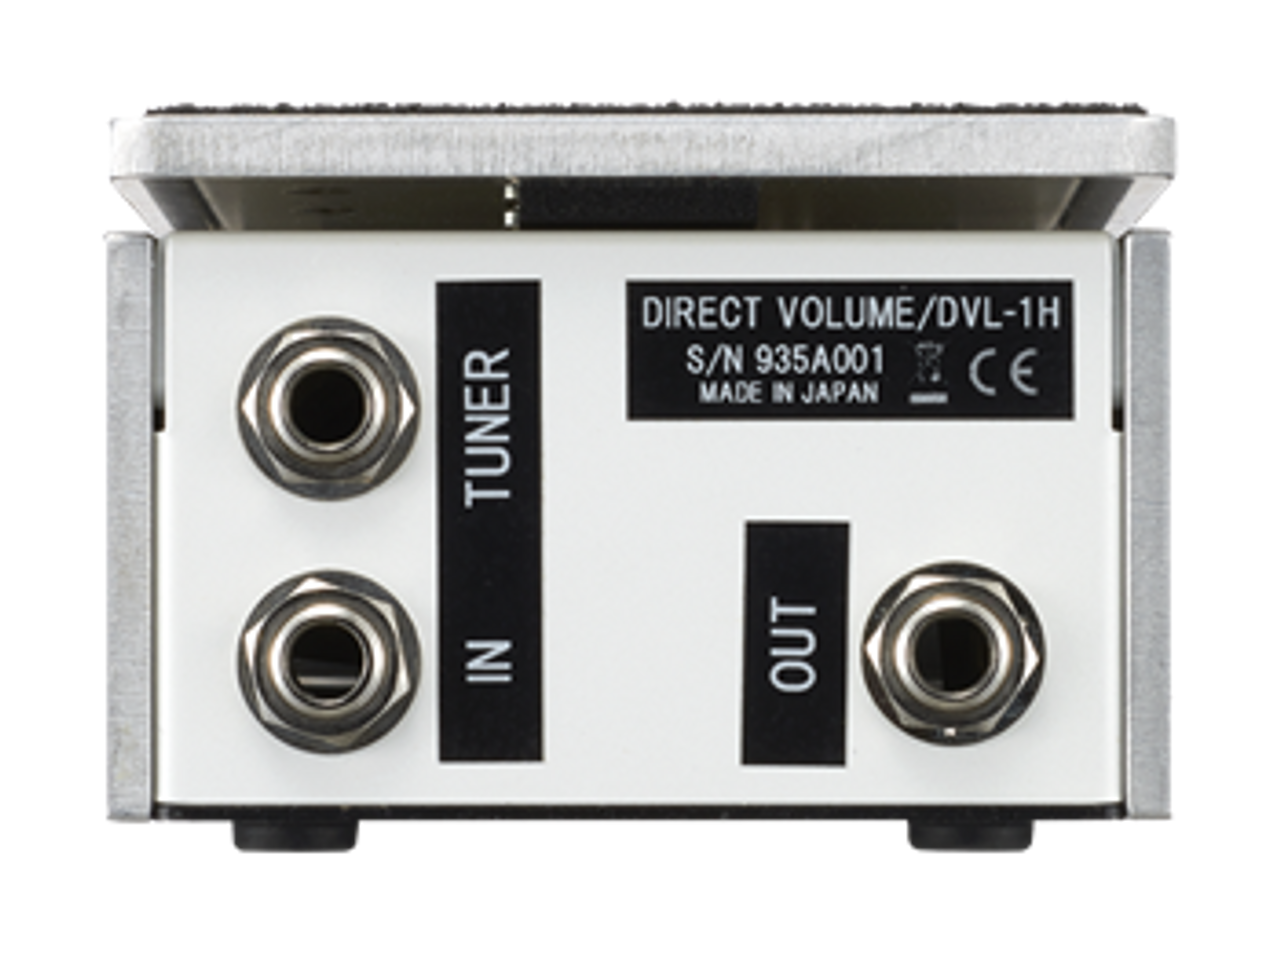 Free The Tone DVL-1H Volume Pedal with Full-Rotation Belt-Drive System